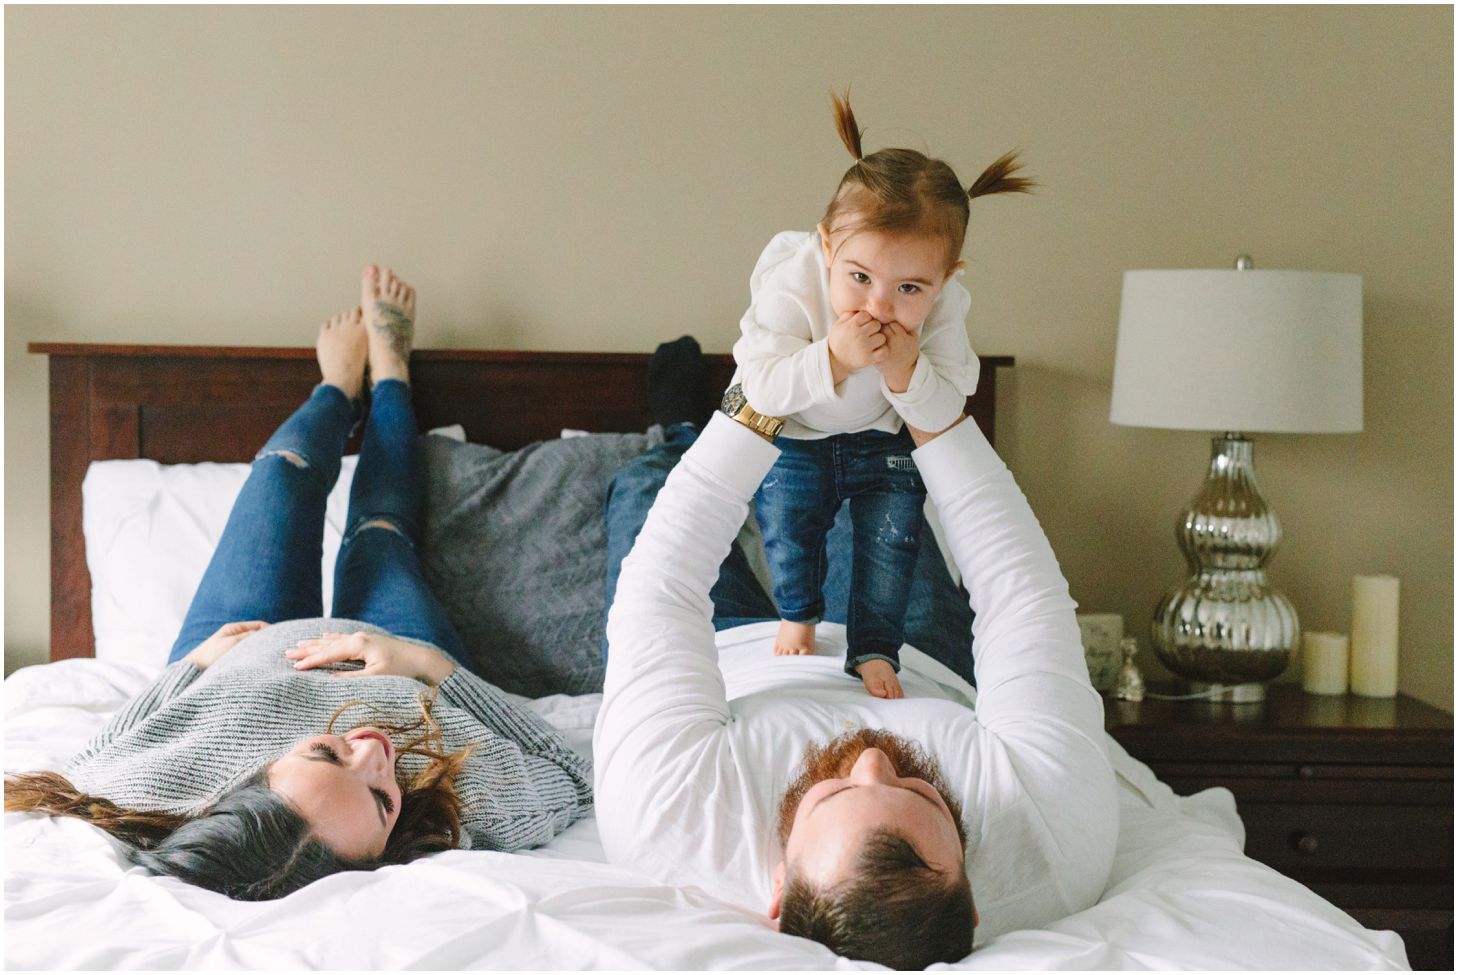 mom, dad, and little girl lay on a white bed together as dad lifts up the little girl